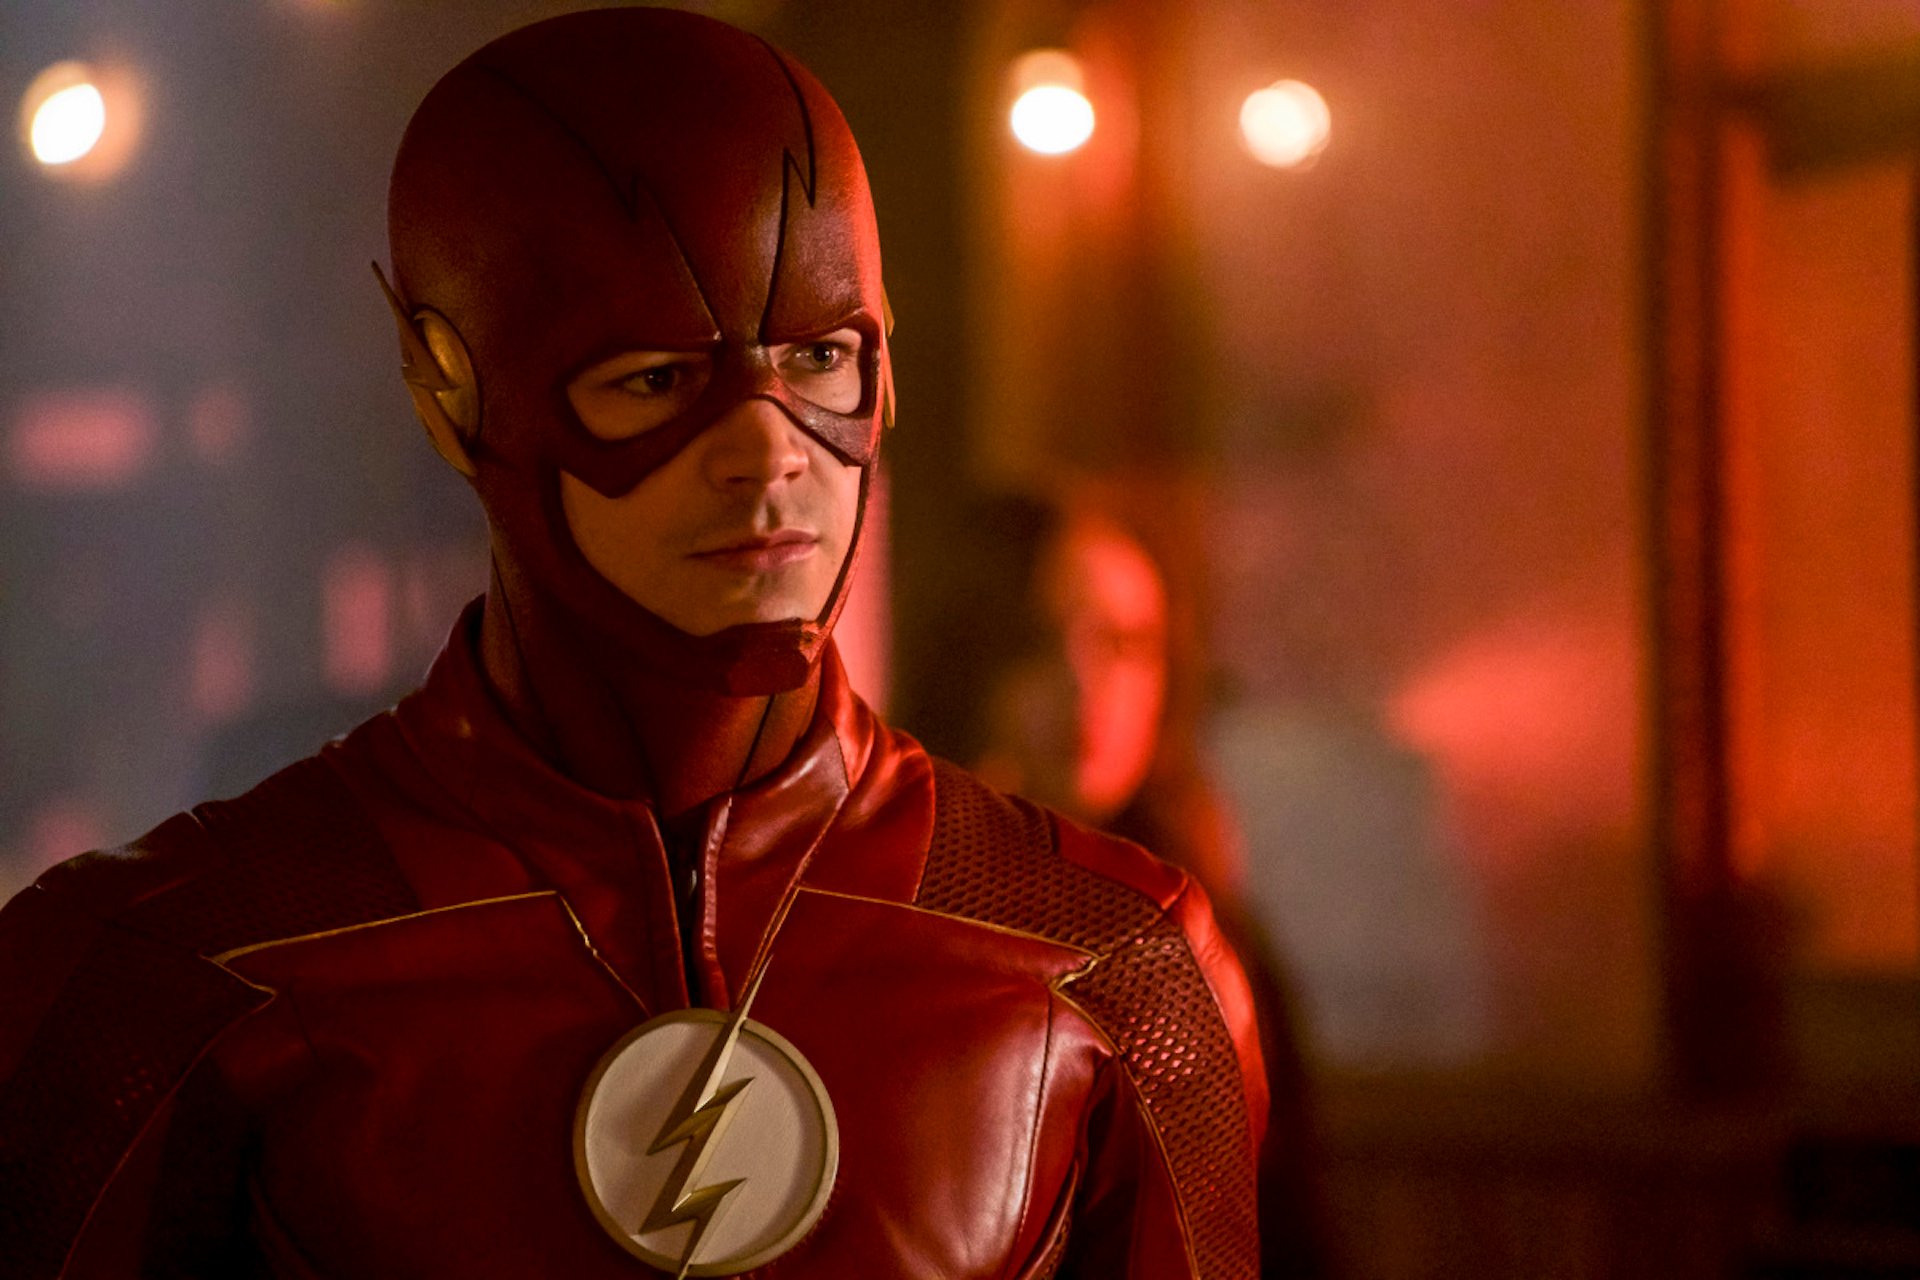 Barry Allen/The Flash (Grant Gustin) in the season finale of 'The Flash,' Finding Your Lane With 'The Flash' Showrunner Eric Wallace